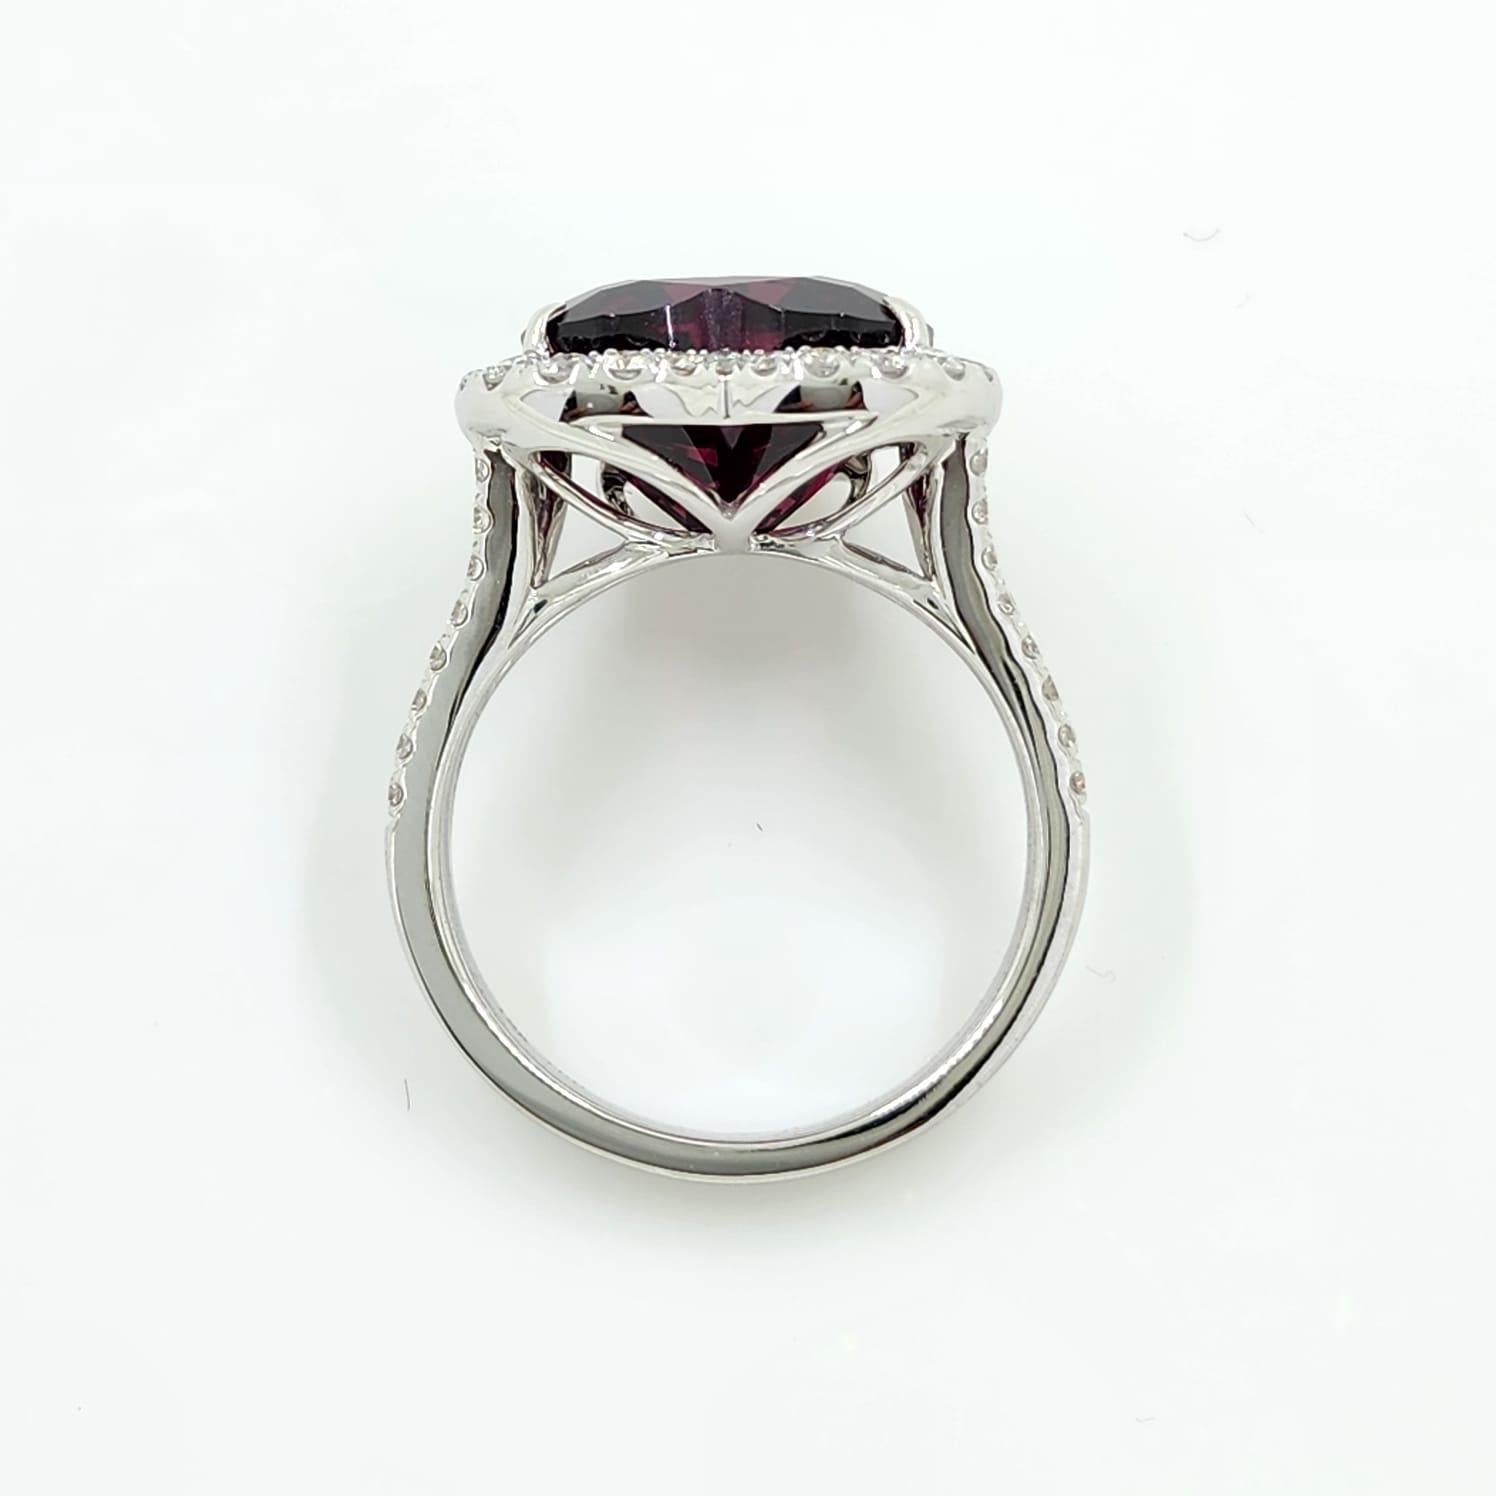 Contemporary GIA Certified 7.37 Carat Heart Garnet and Diamond Ring in 18K White Gold For Sale